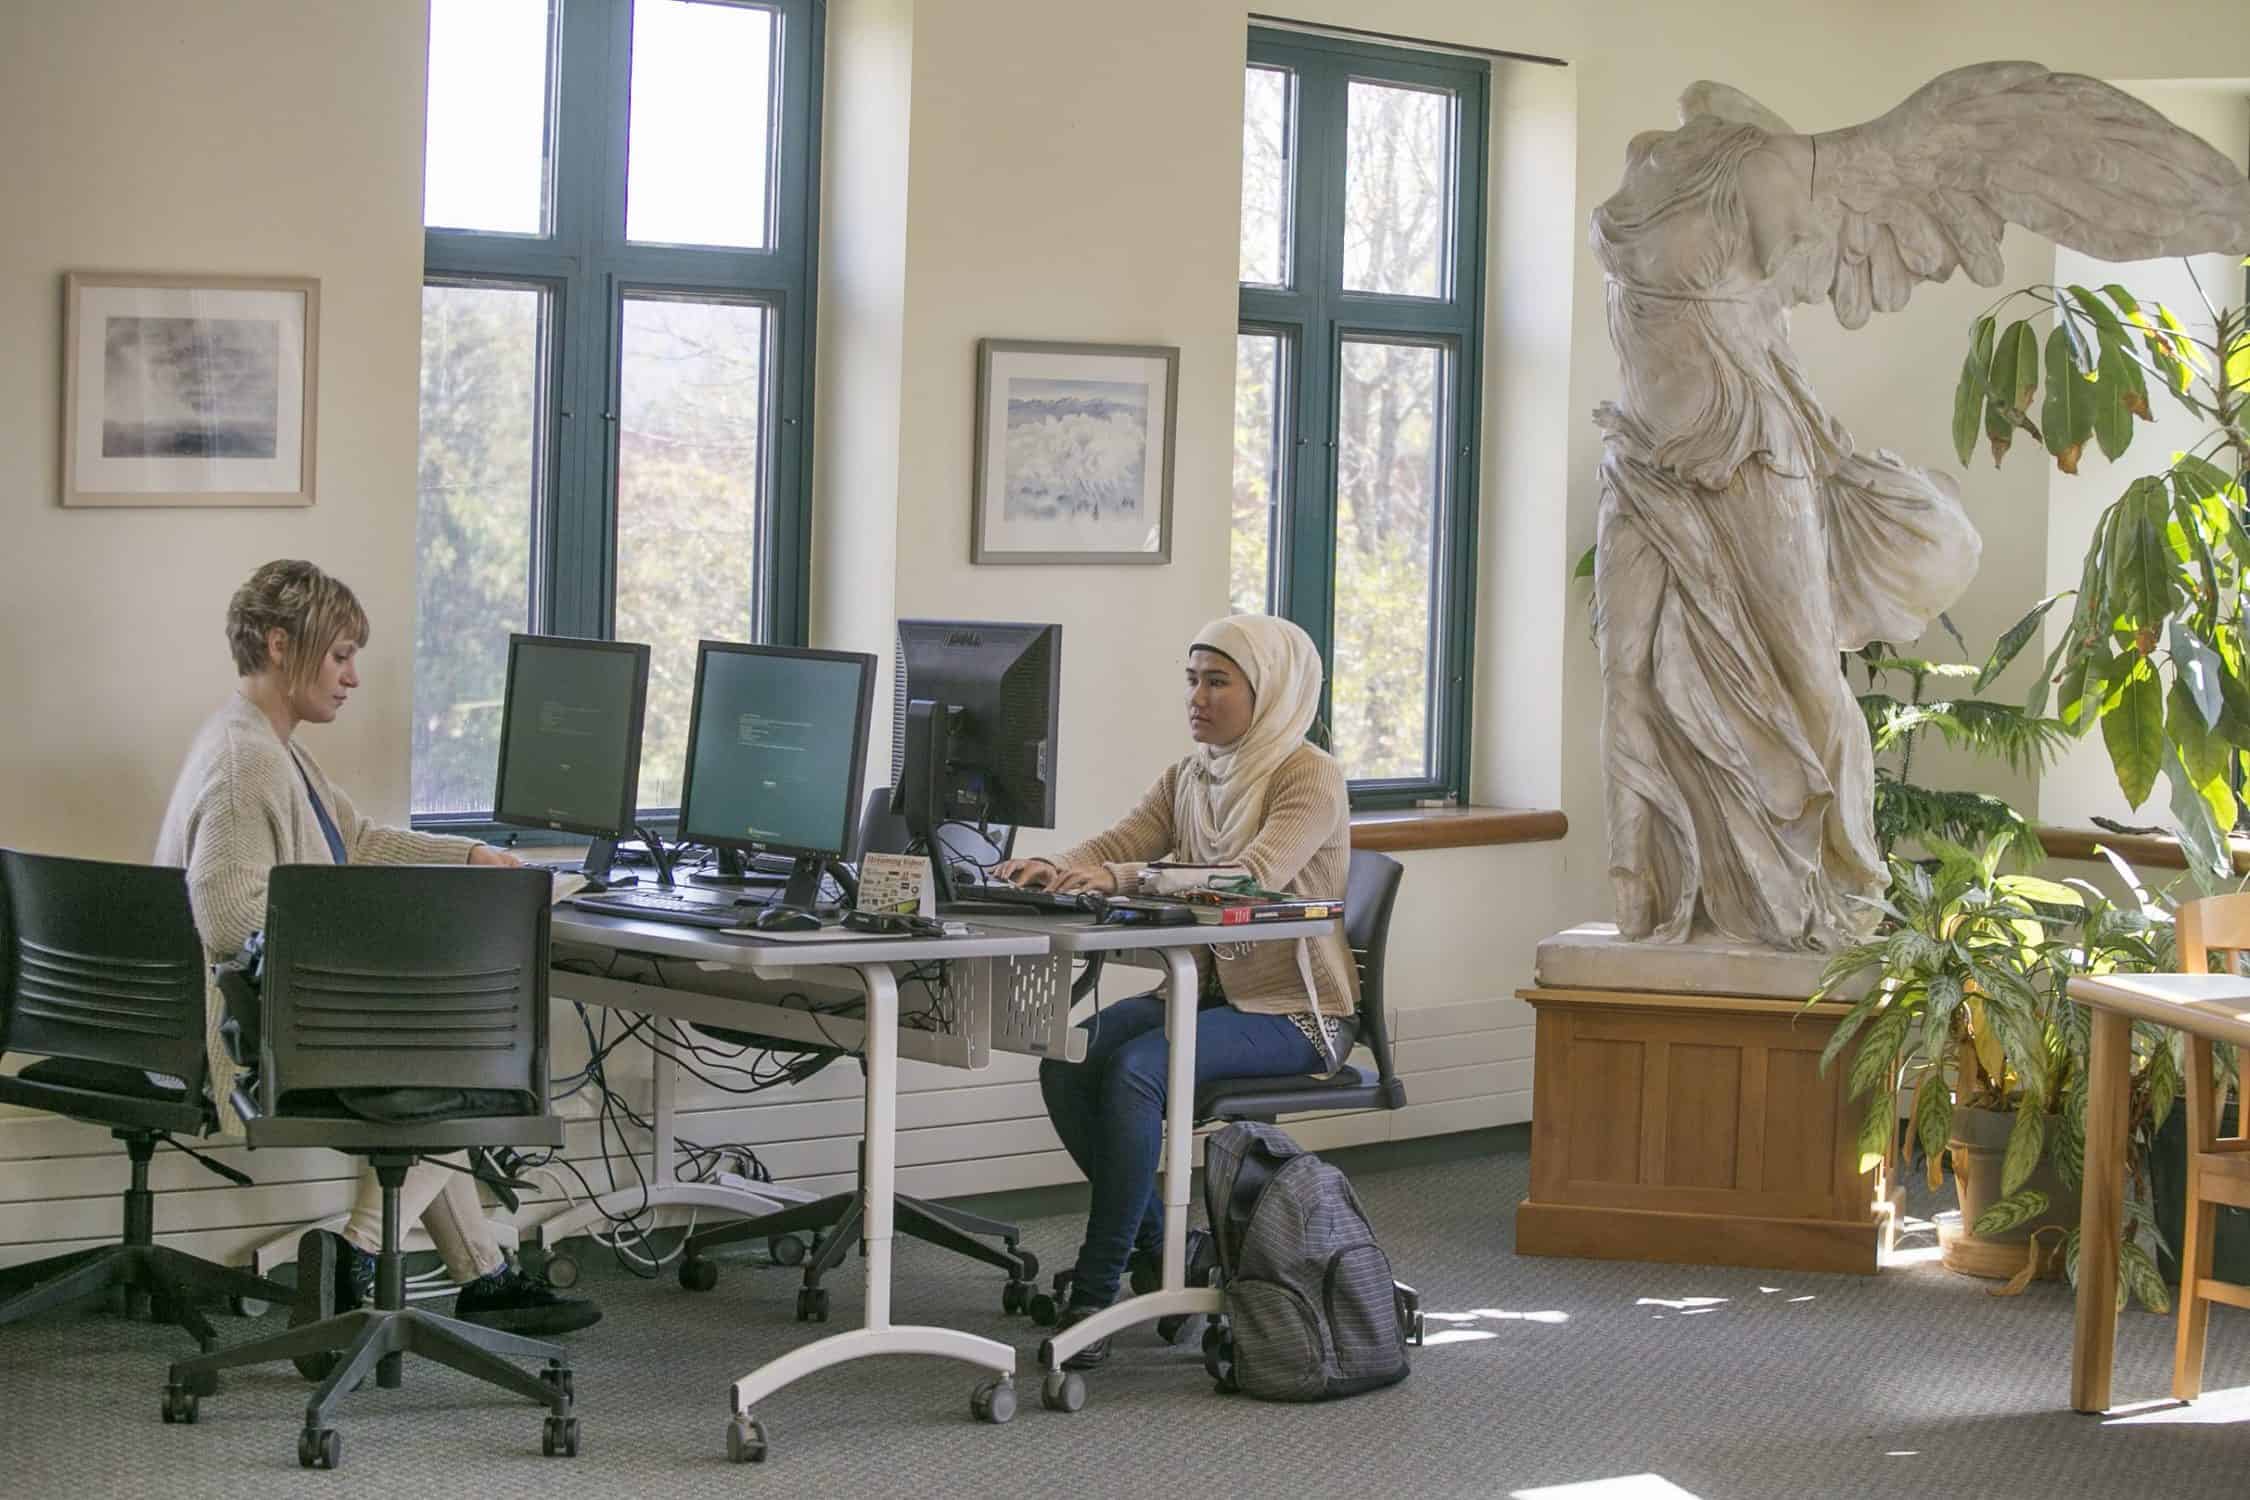 Students work at computers near a window with a statue in the background